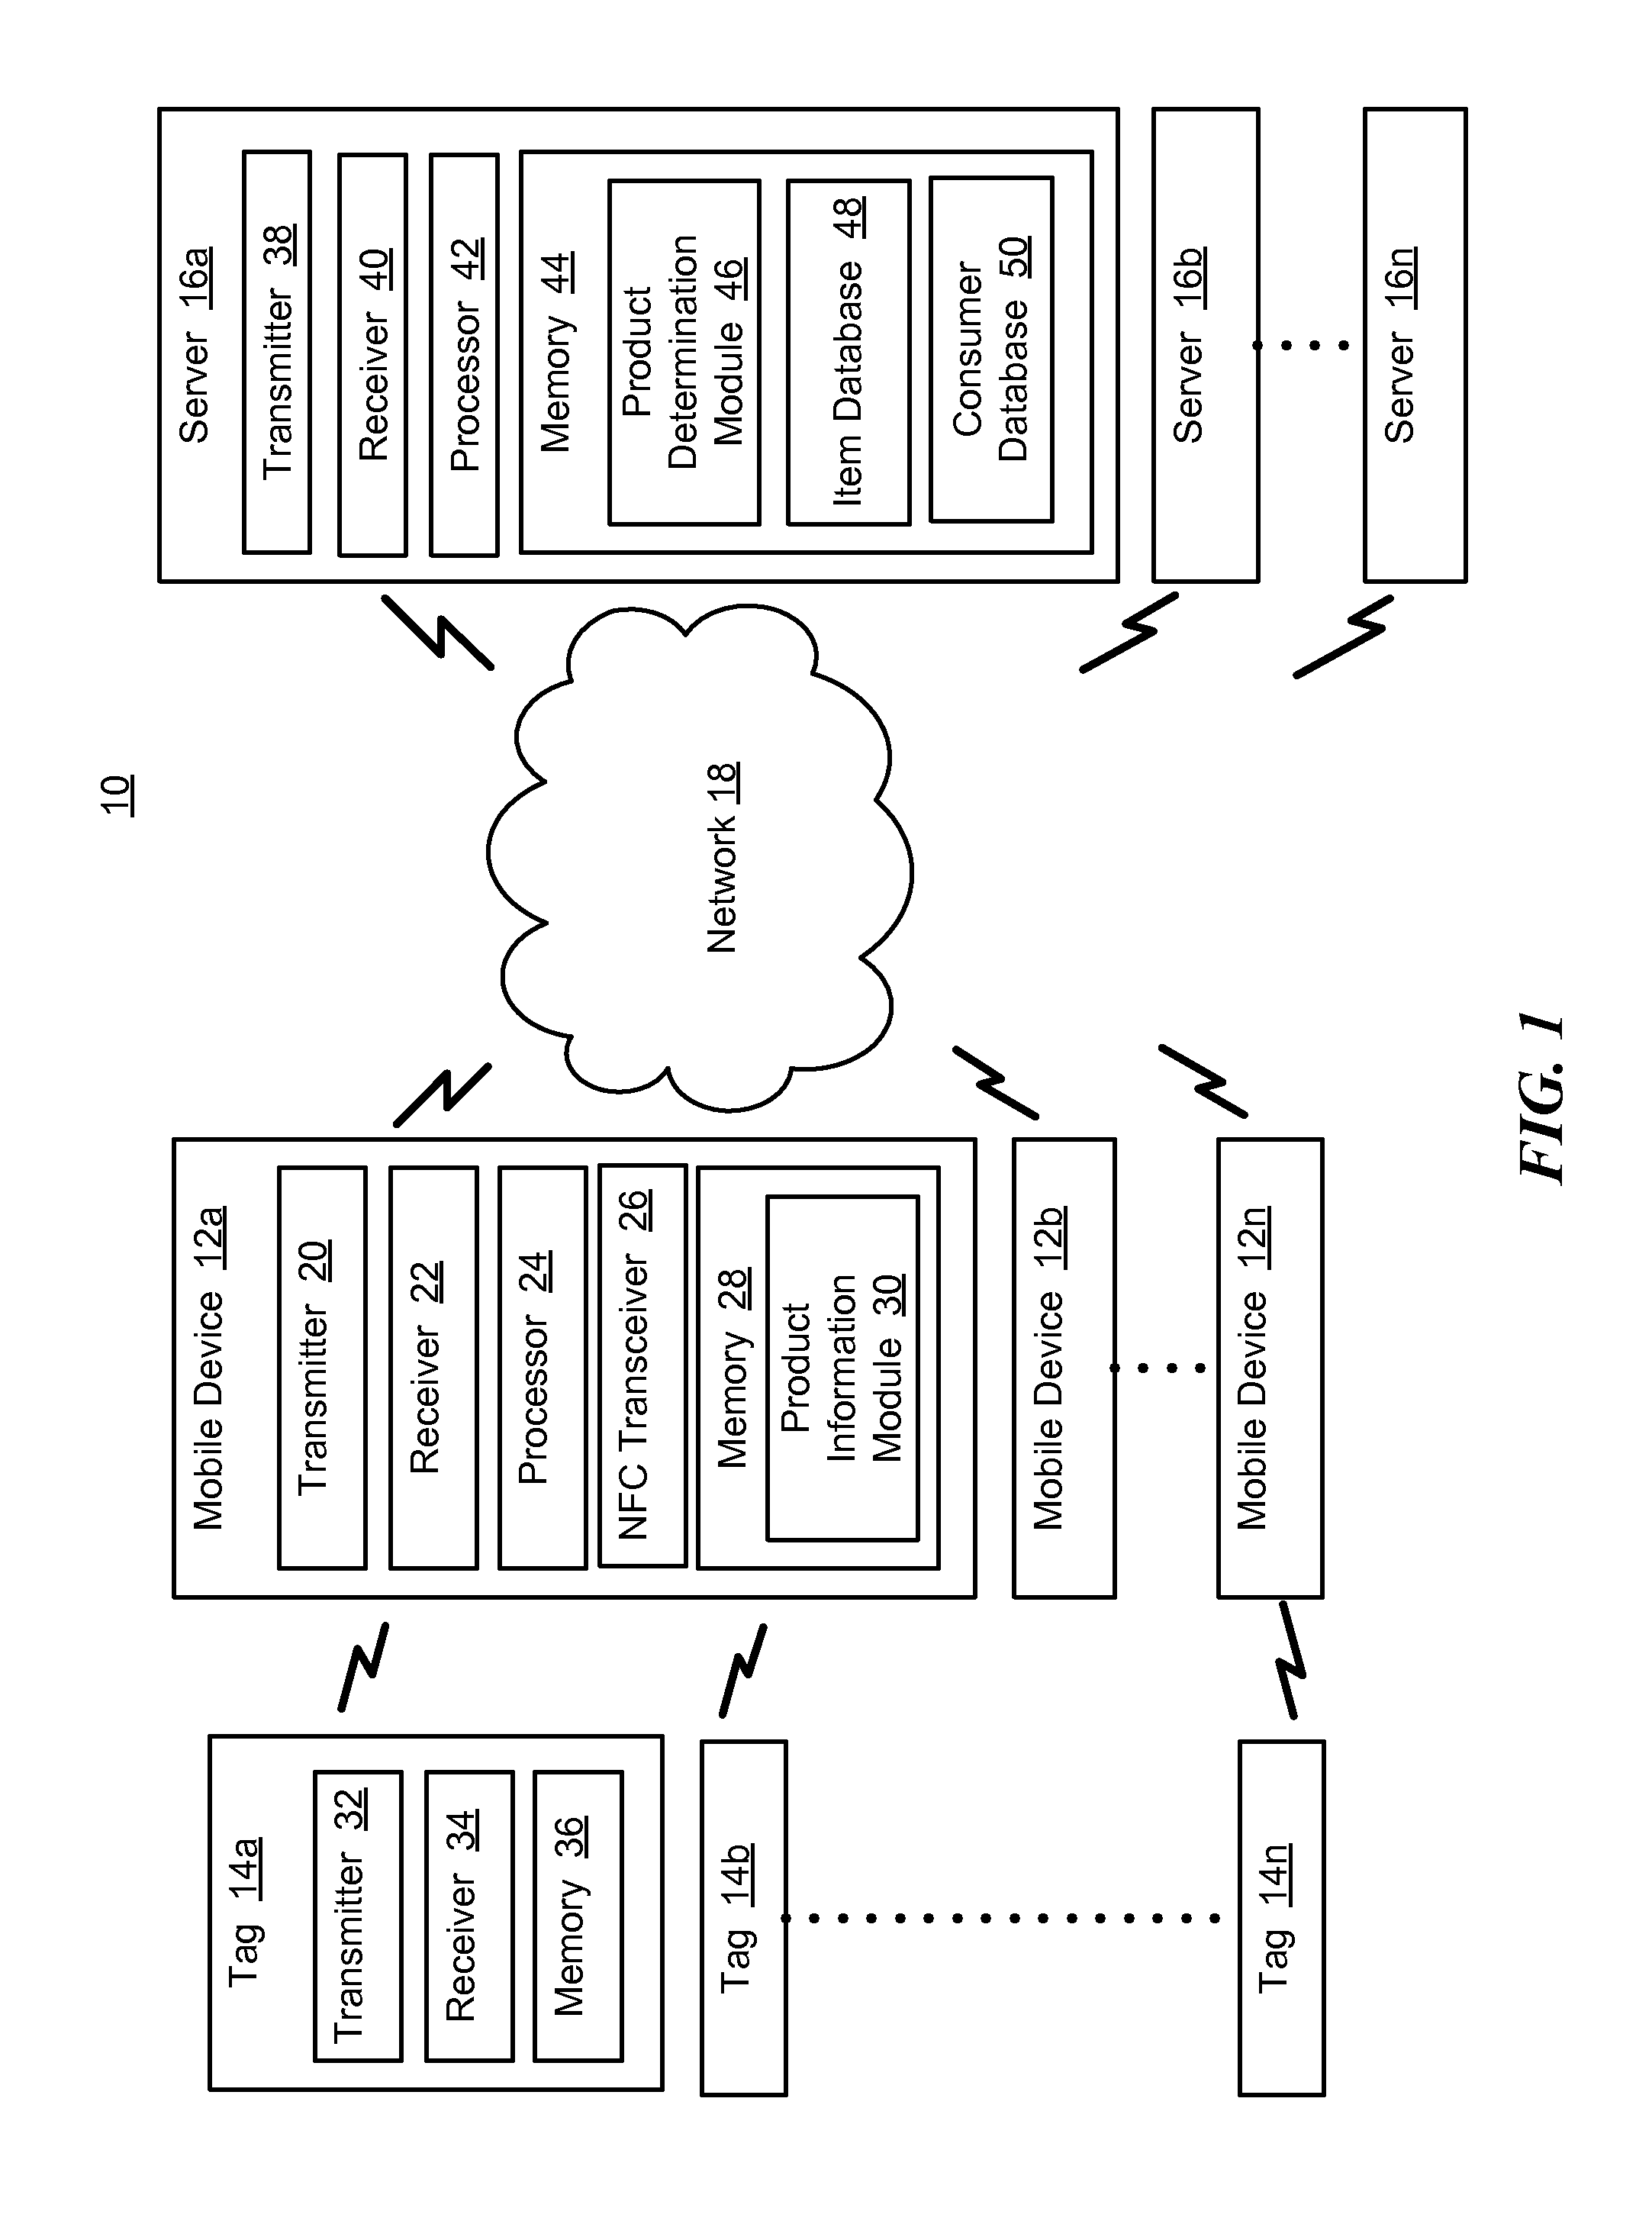 Product information system and method using a tag and mobile device